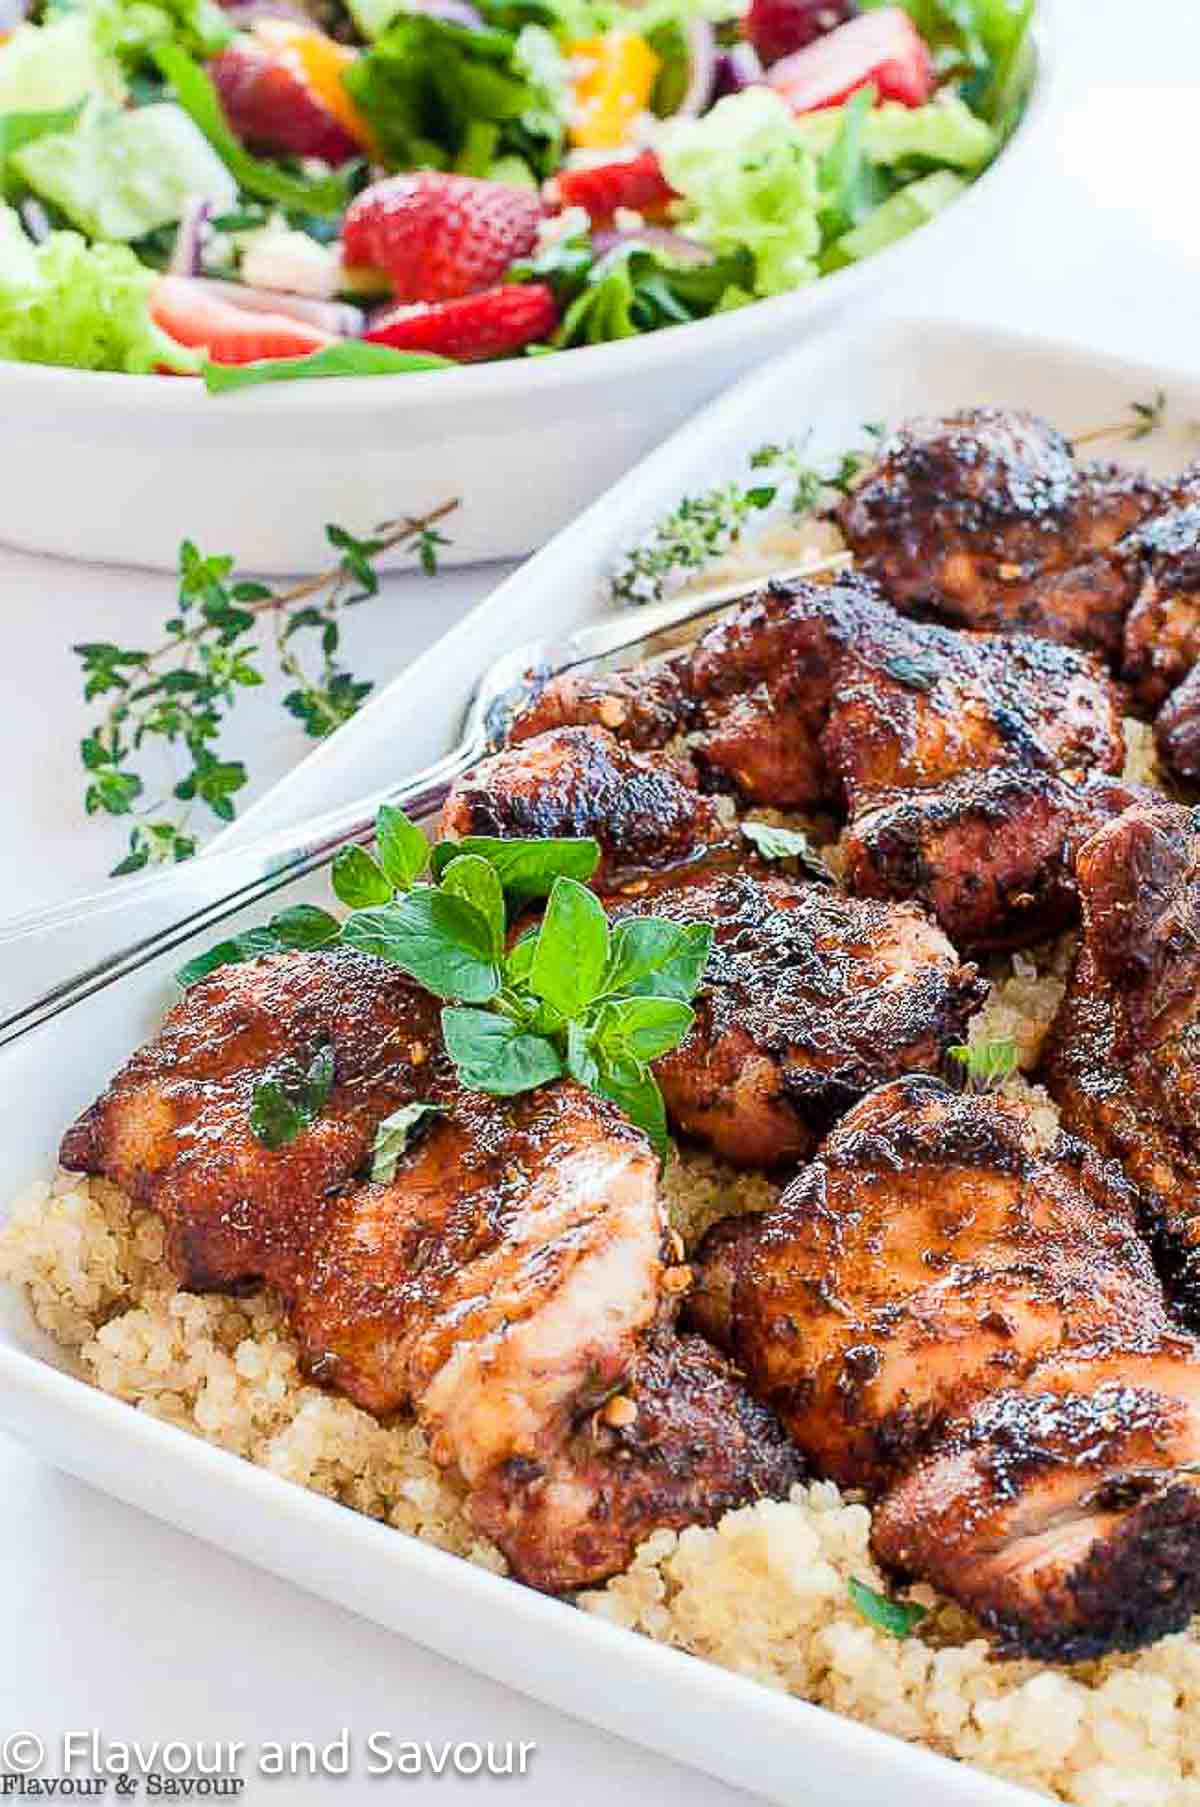 A platter of grilled cajun chicken thighs on a bed of quinoa.